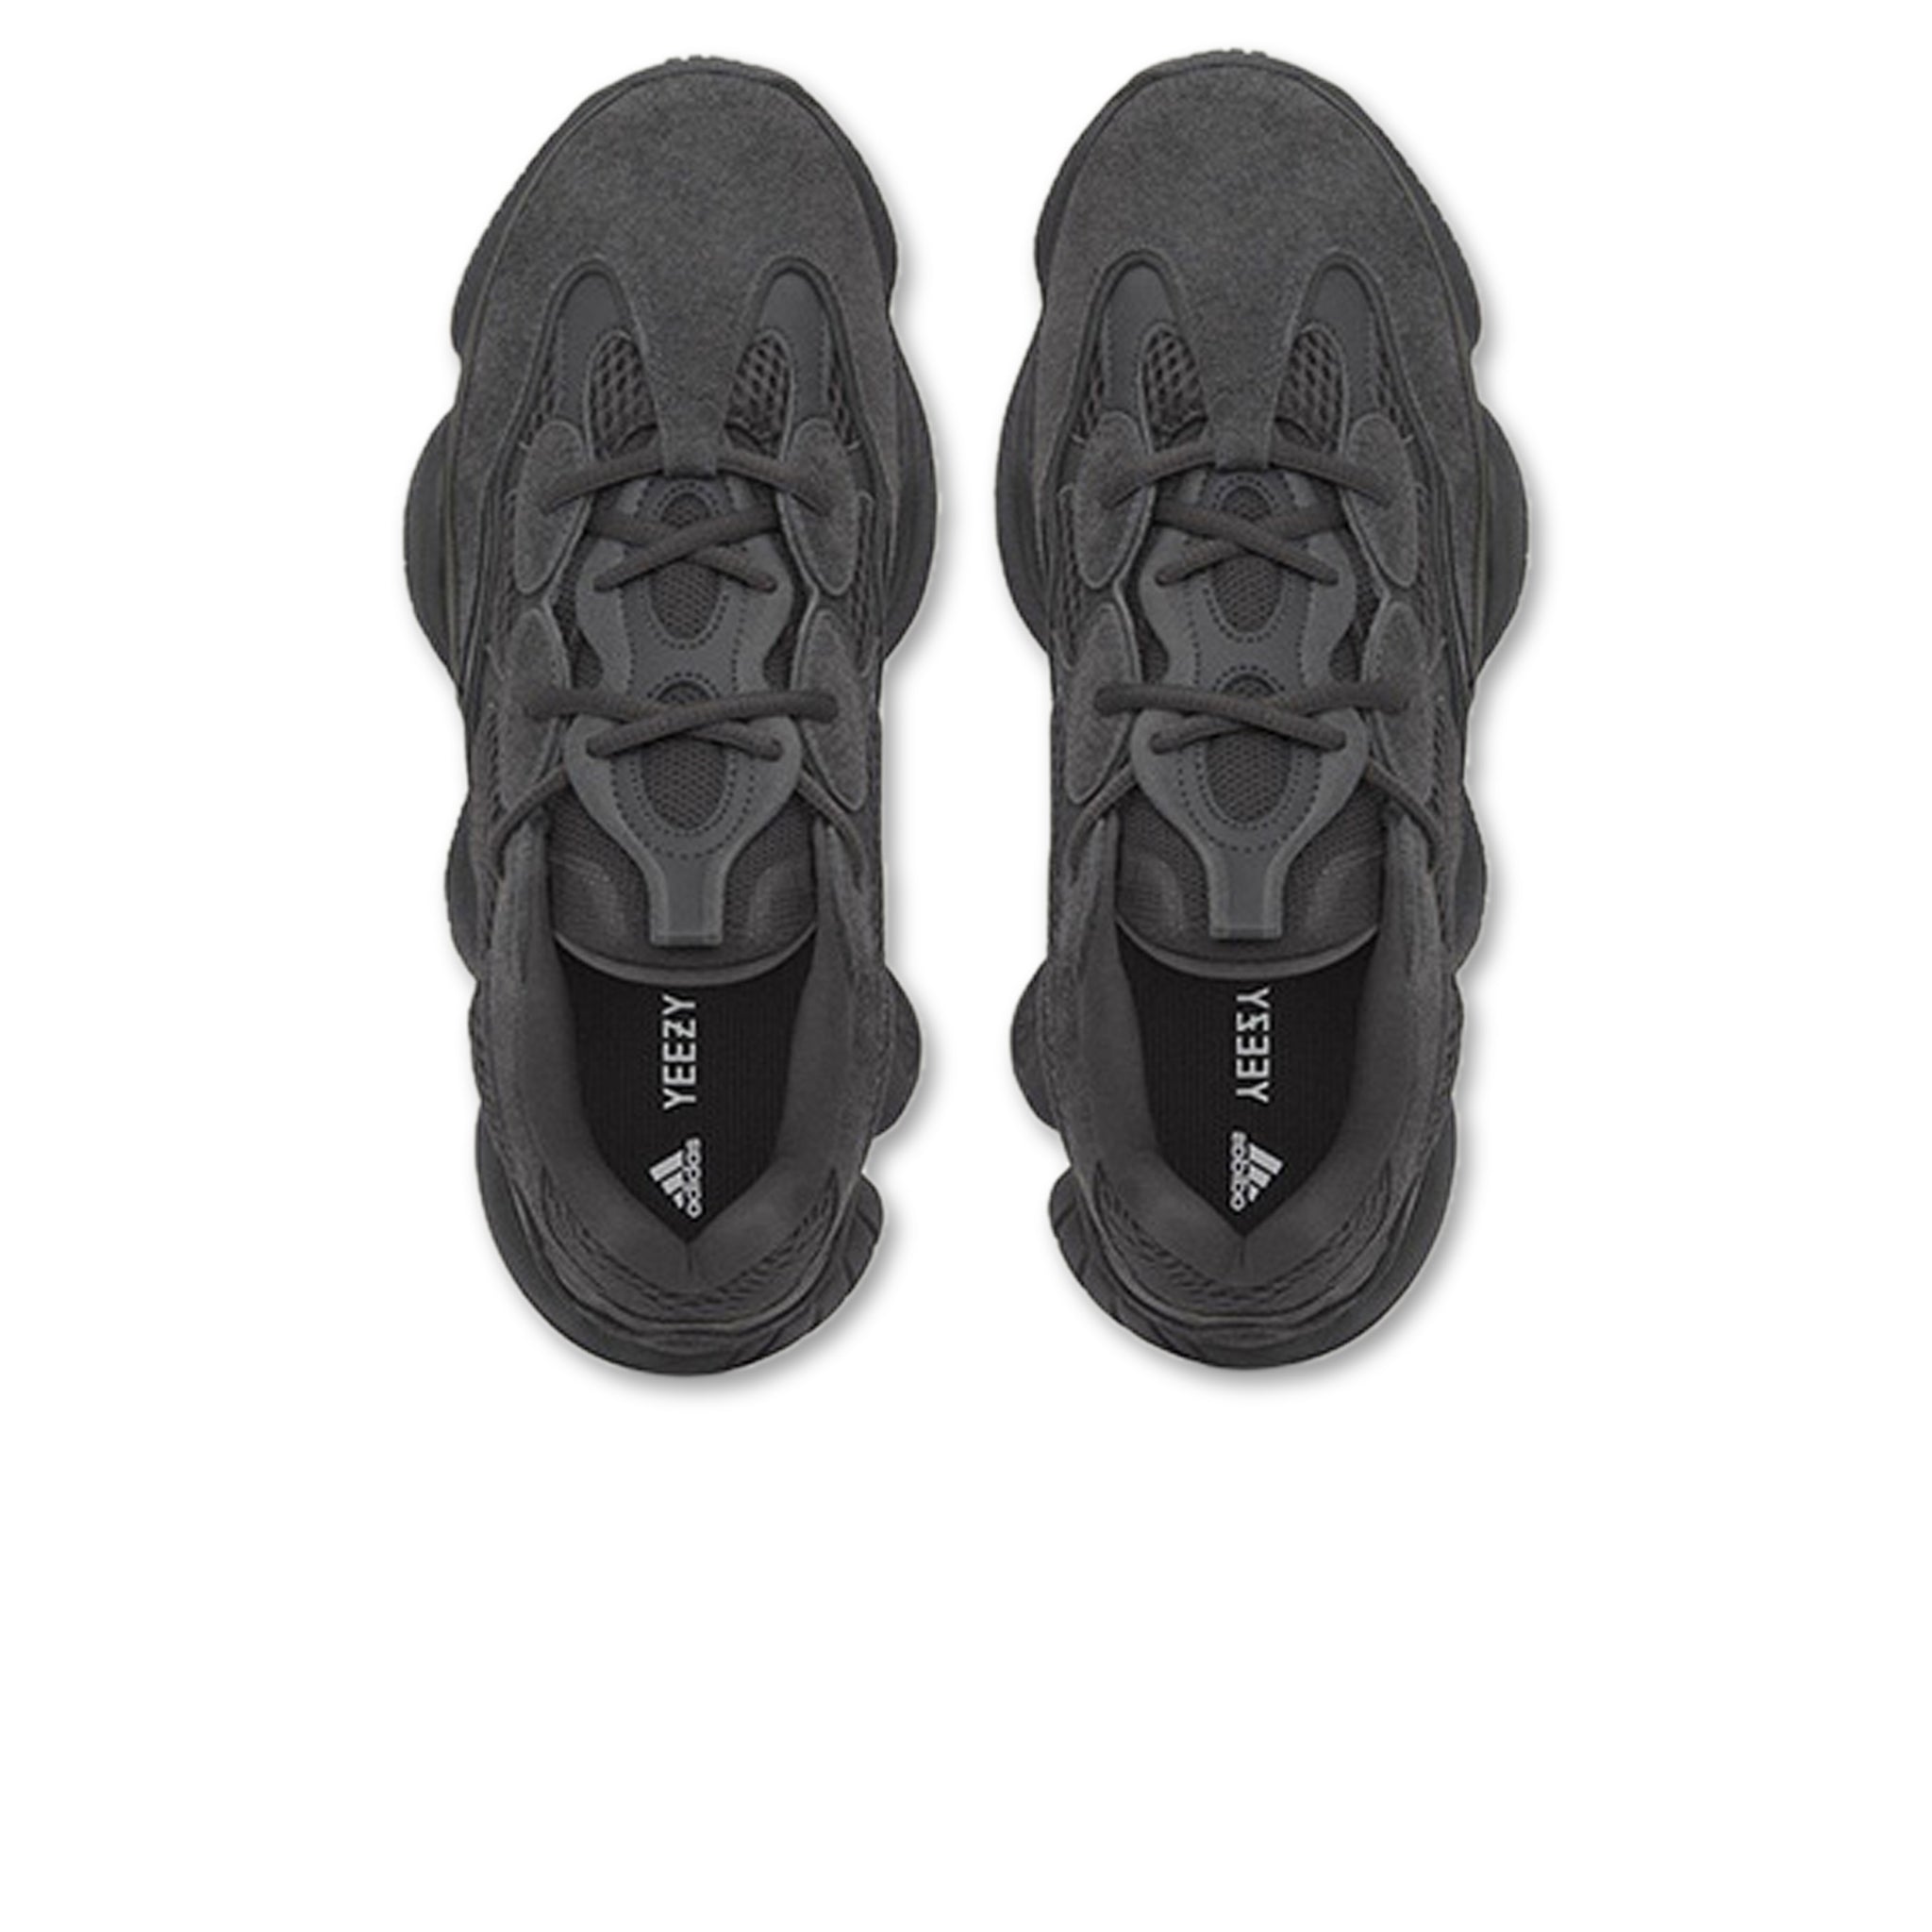 Top down view of Adidas Yeezy 500 Utility Black F36640